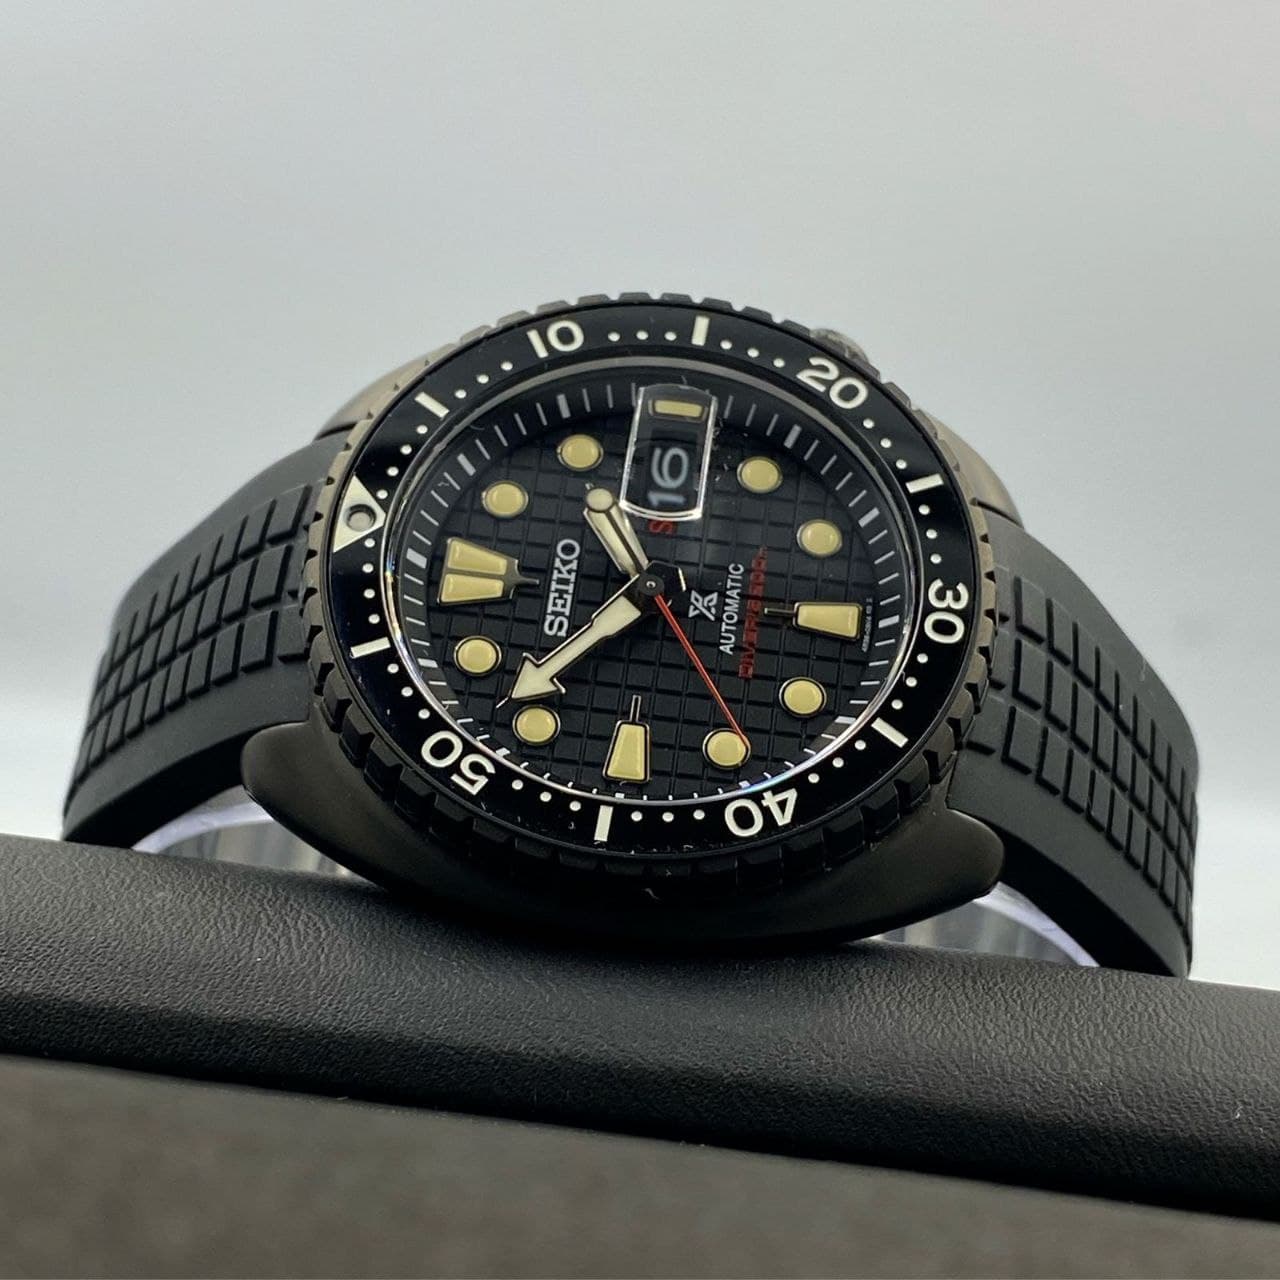 Limited-Edition Timepiece: The Seiko Black King Turtle – Crafter Blue